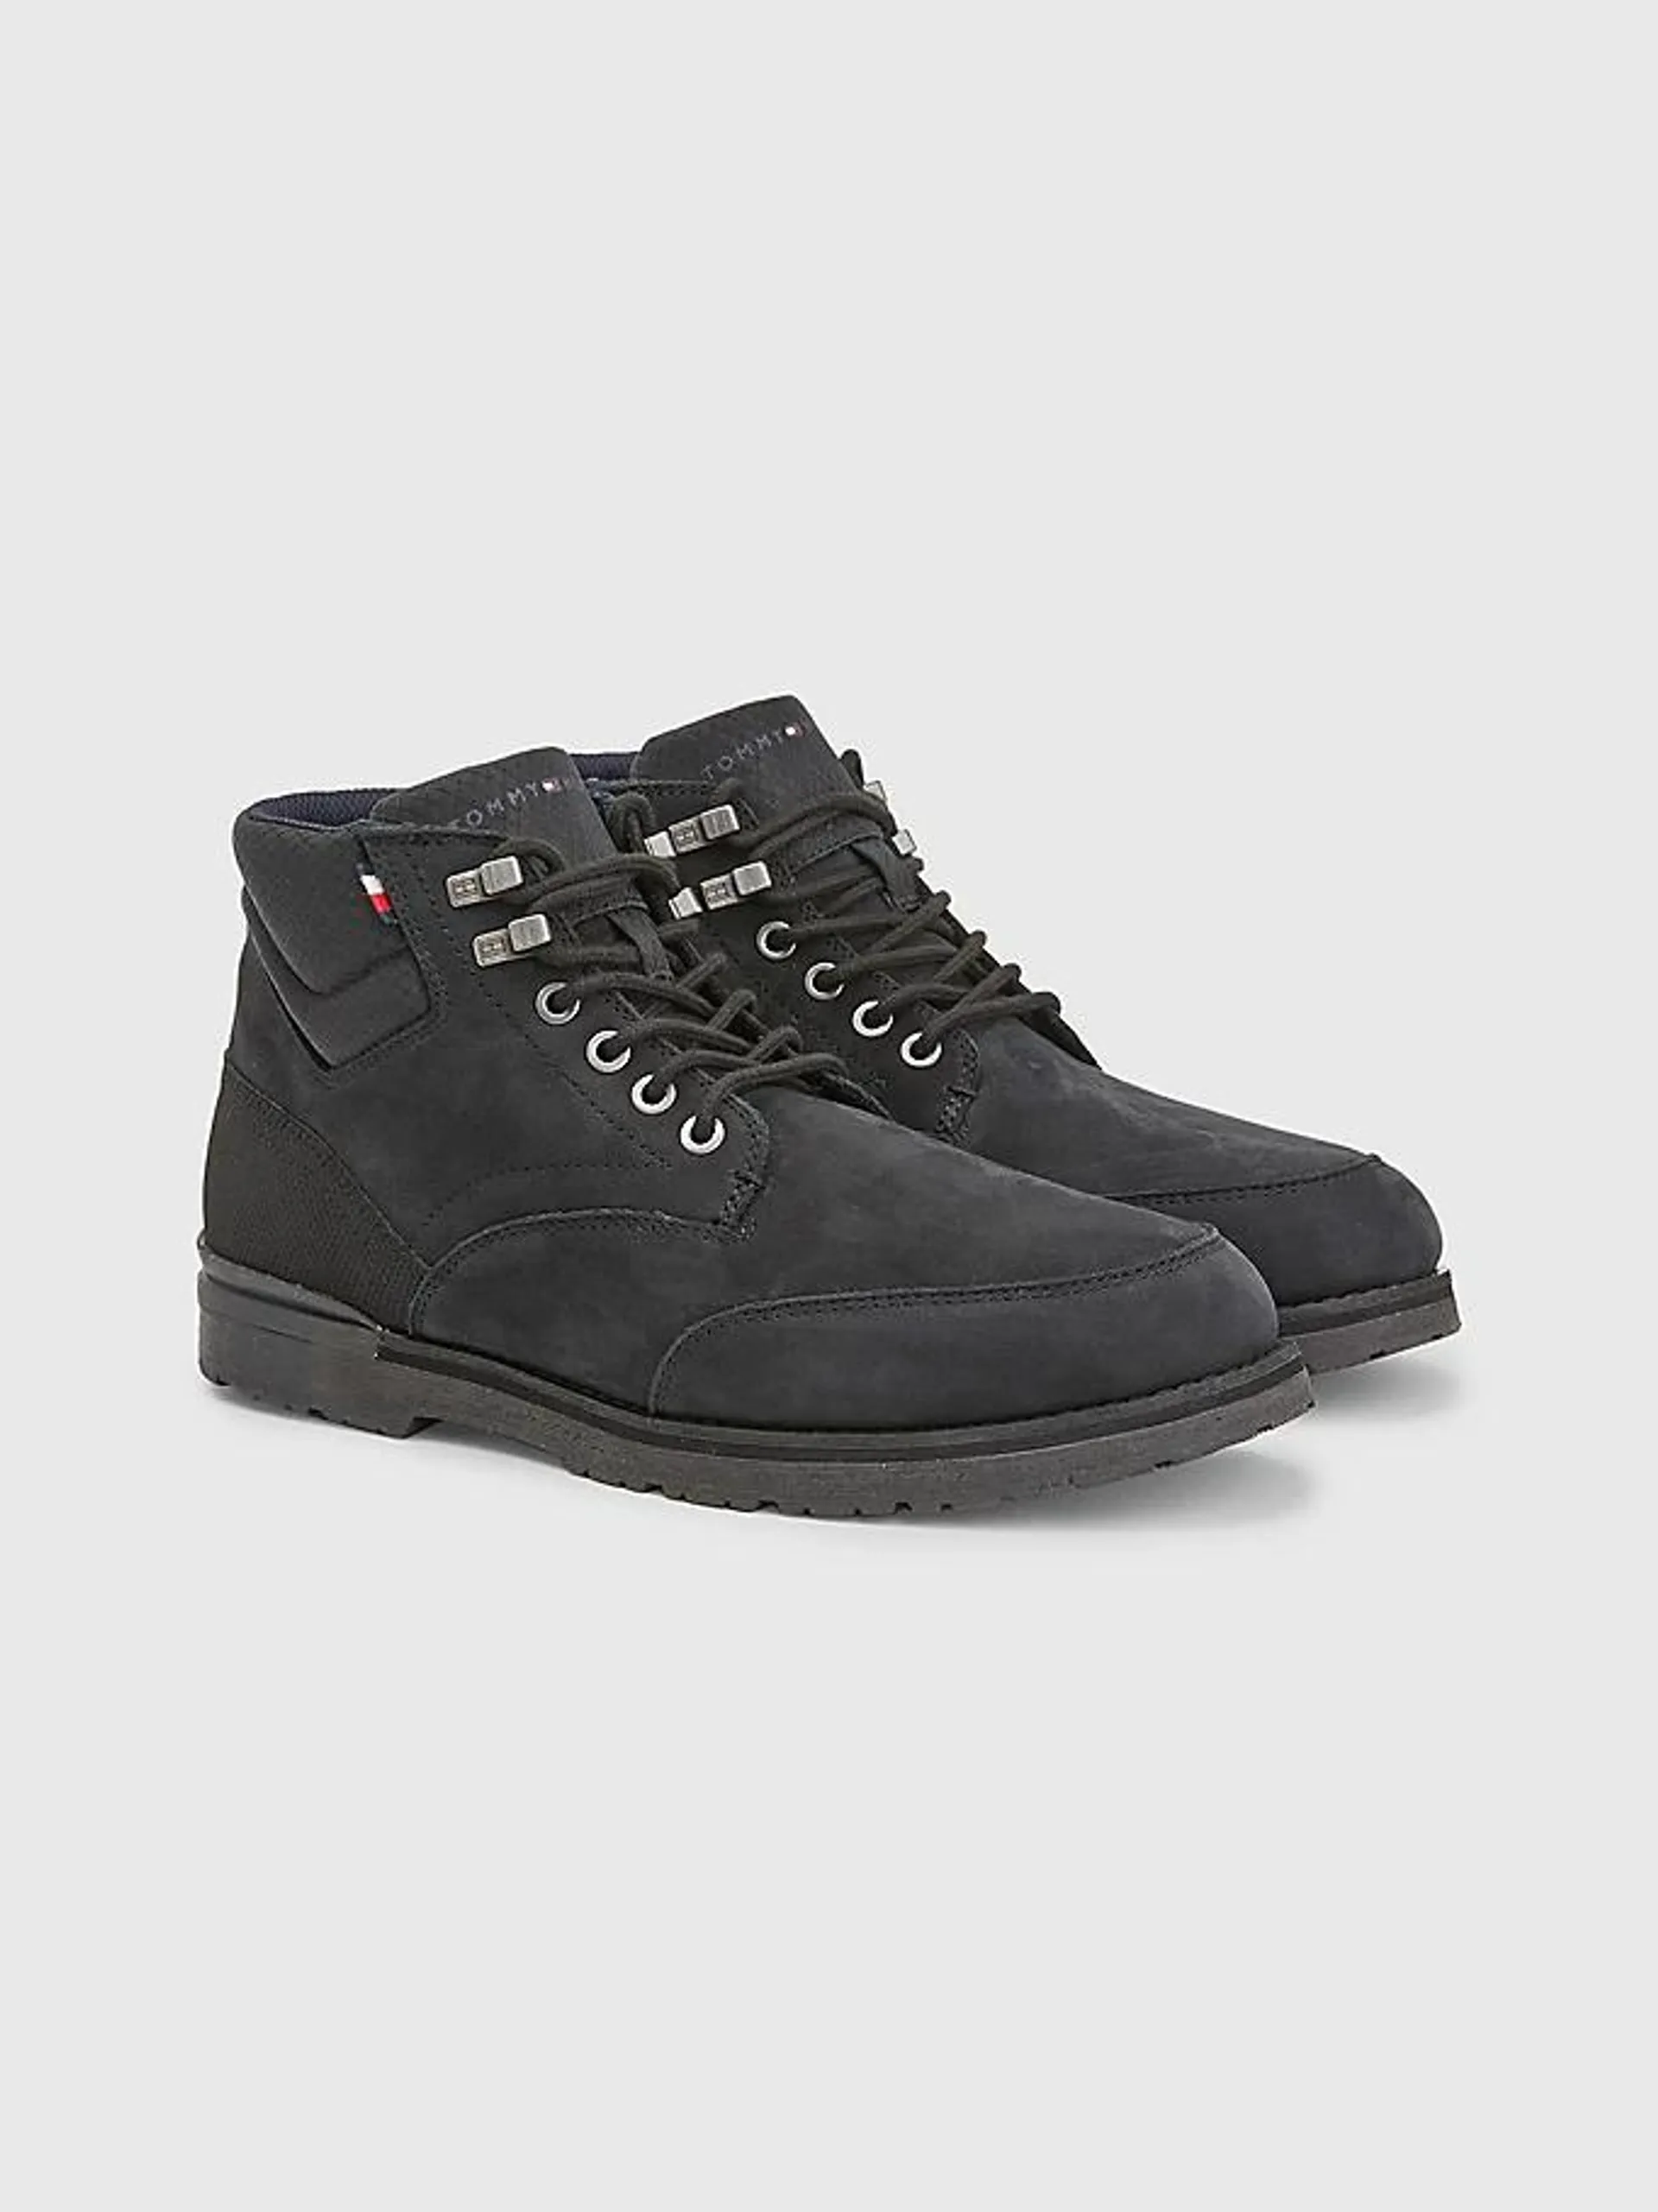 Nubuck Leather Mixed Texture Lace-Up Boots